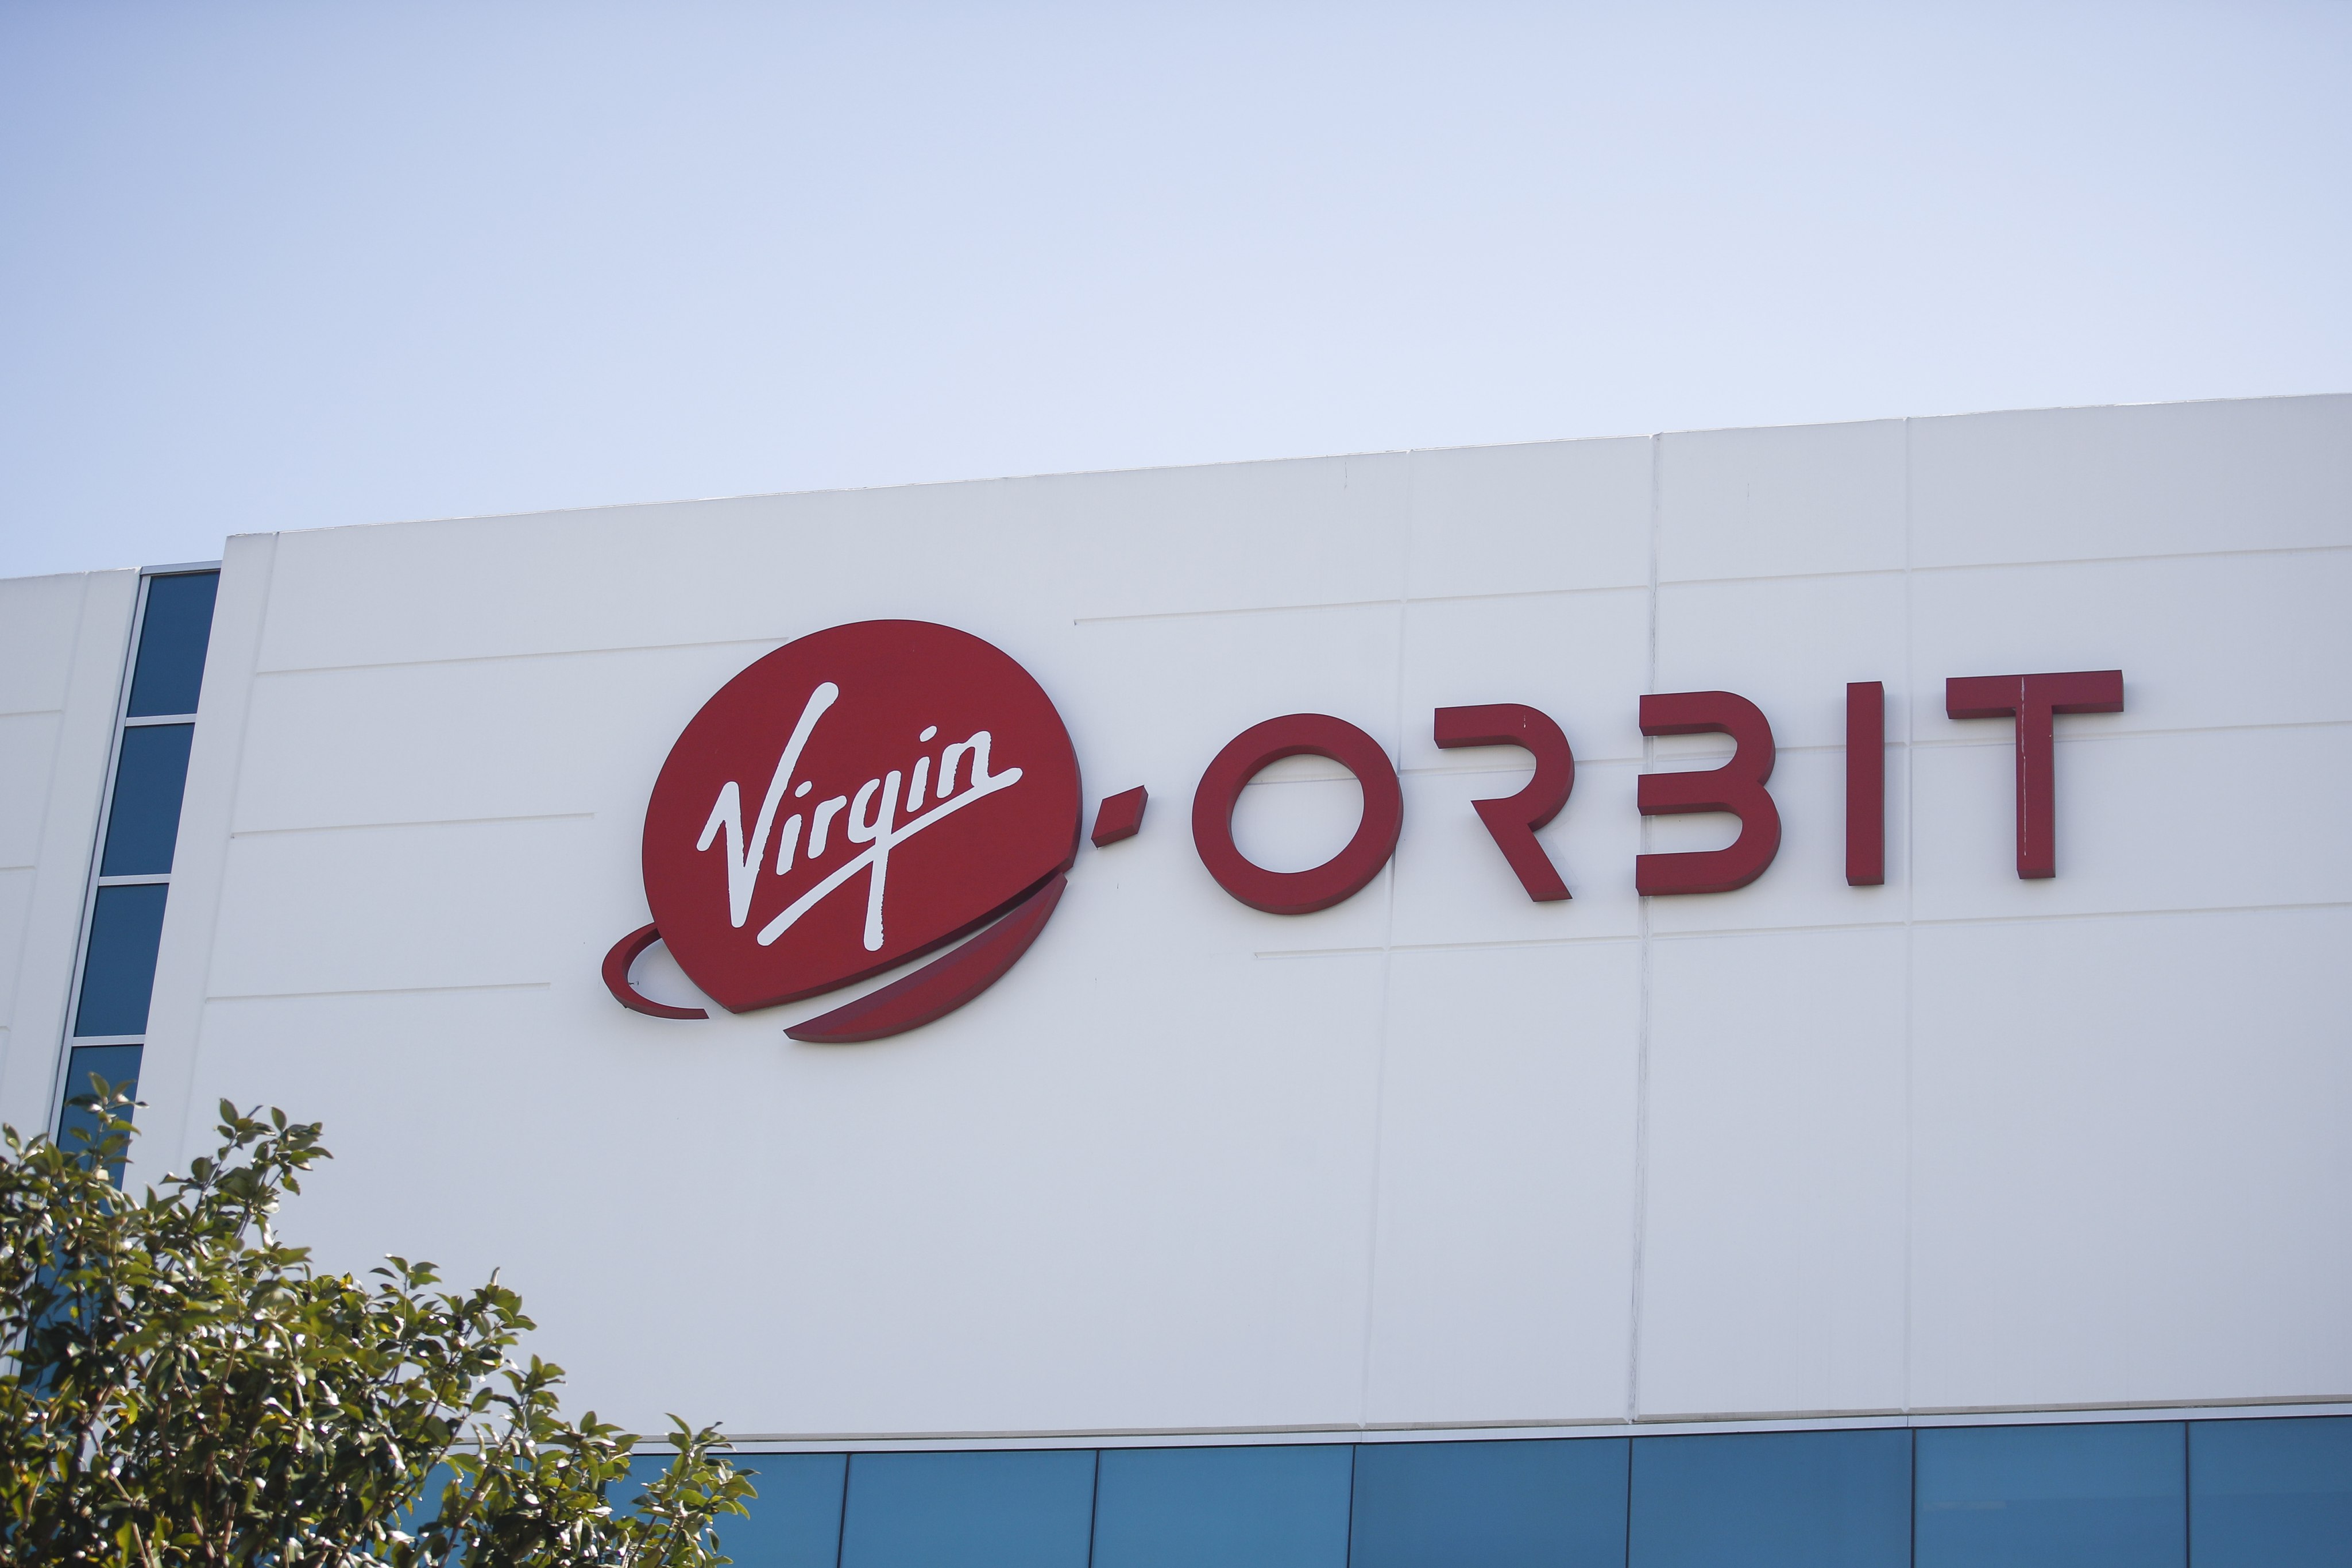 Virgin Orbit, the satellite launch company founded by Richard Branson that has filed for bankruptcy, owes money to two Japanese firms. Photo: EPA-EFE